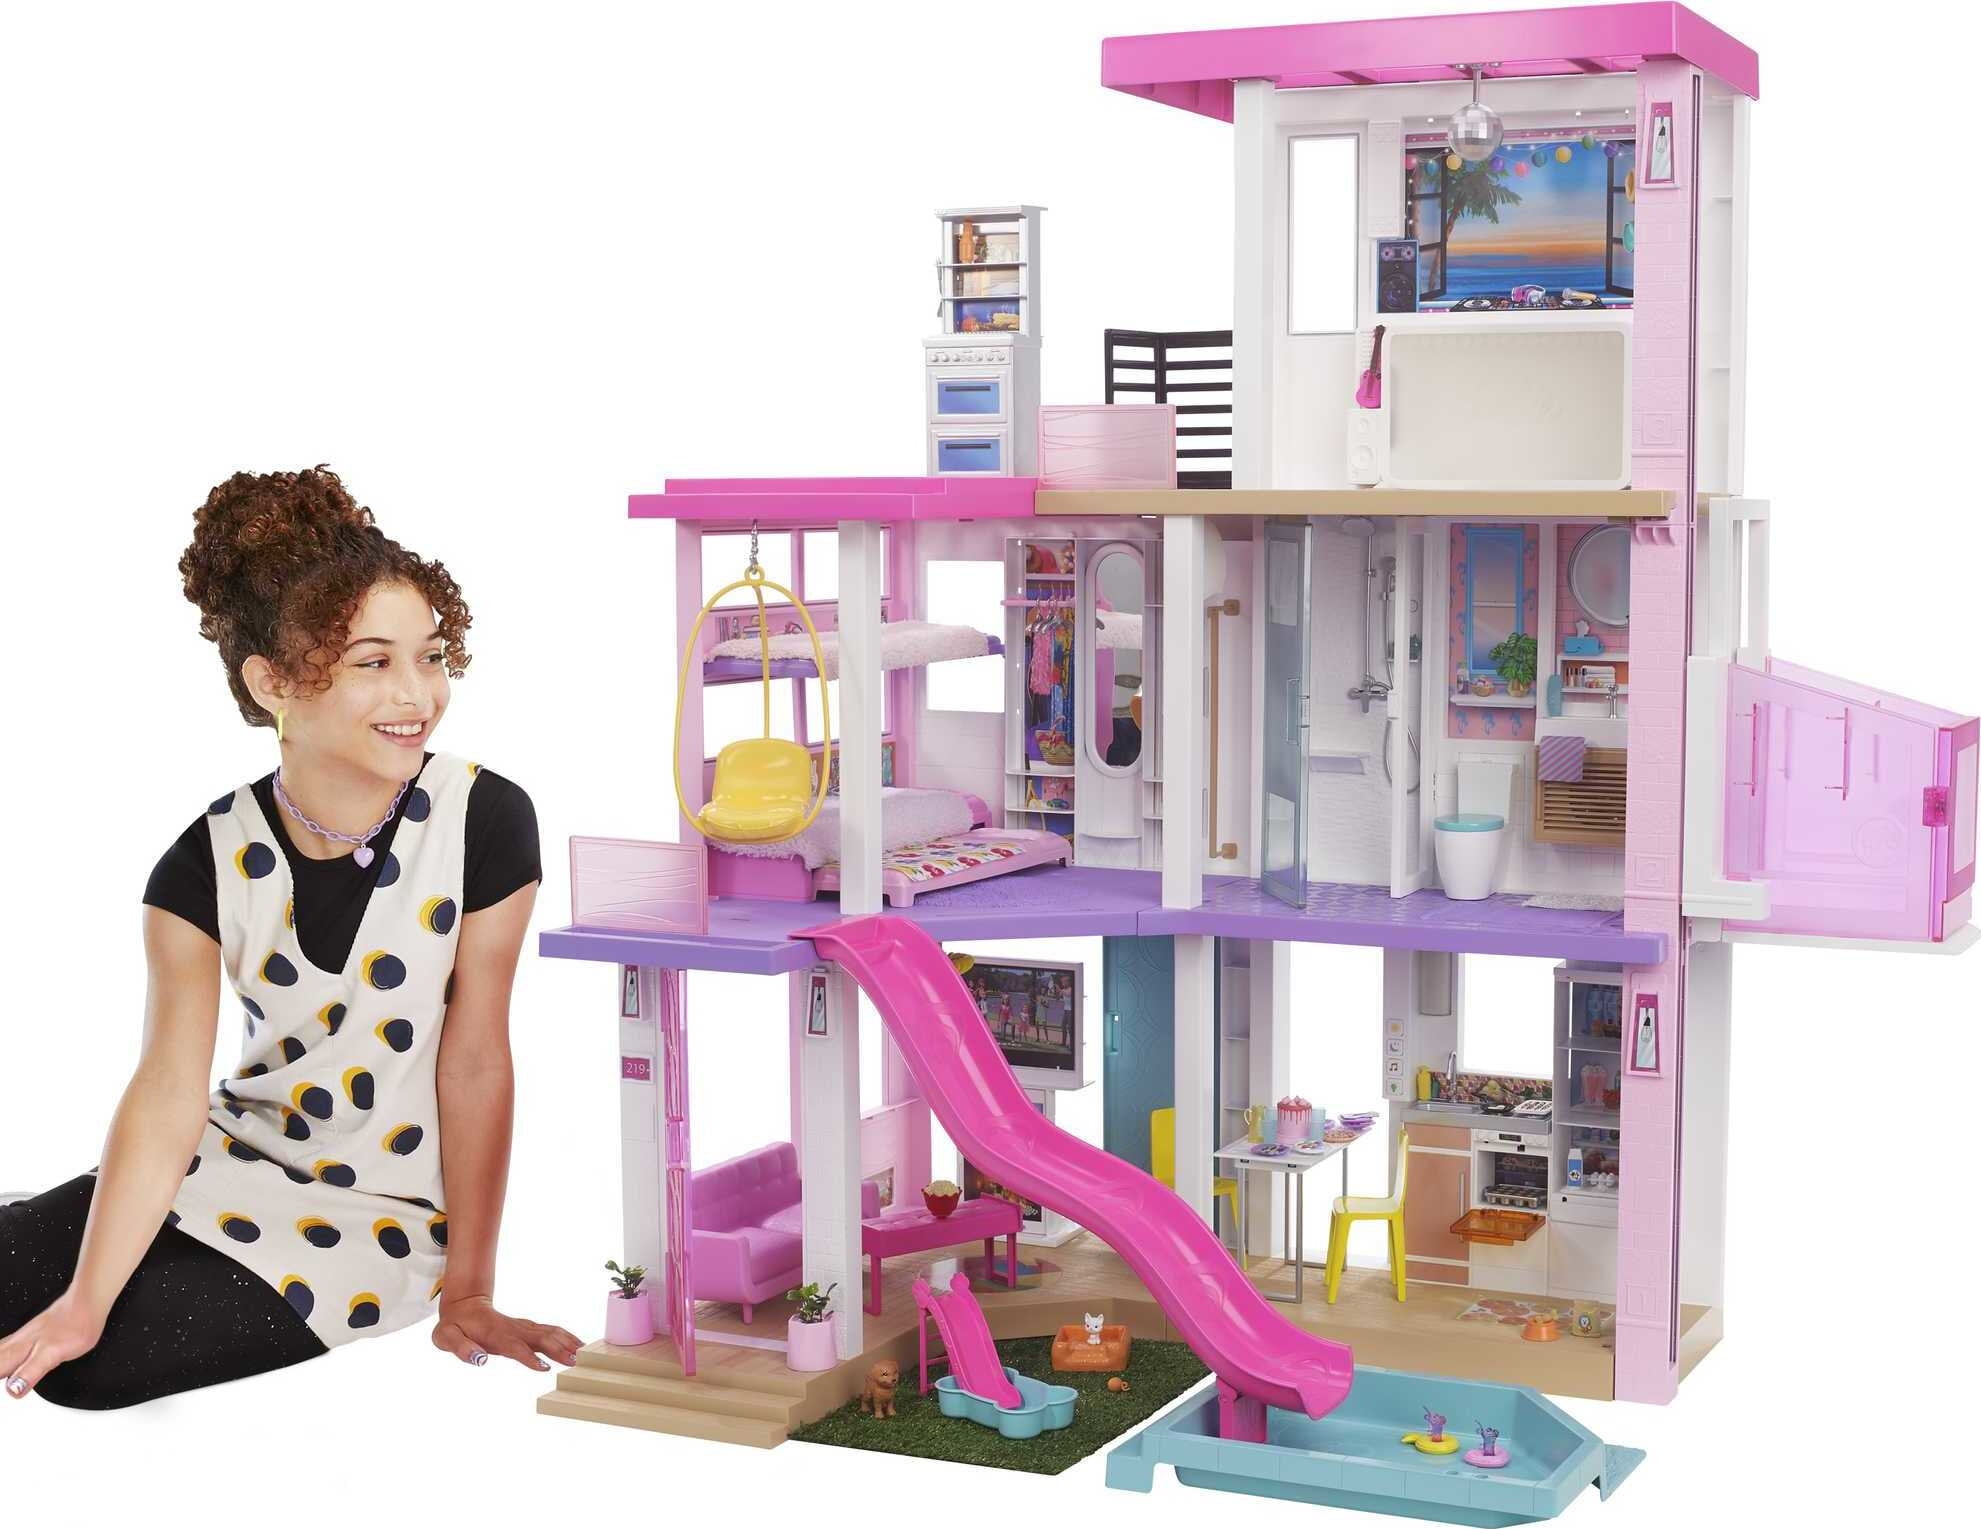 Barbie DreamHouse Playset with 10 Areas, Furniture Accessories, Lights & Sounds - Walmart.com